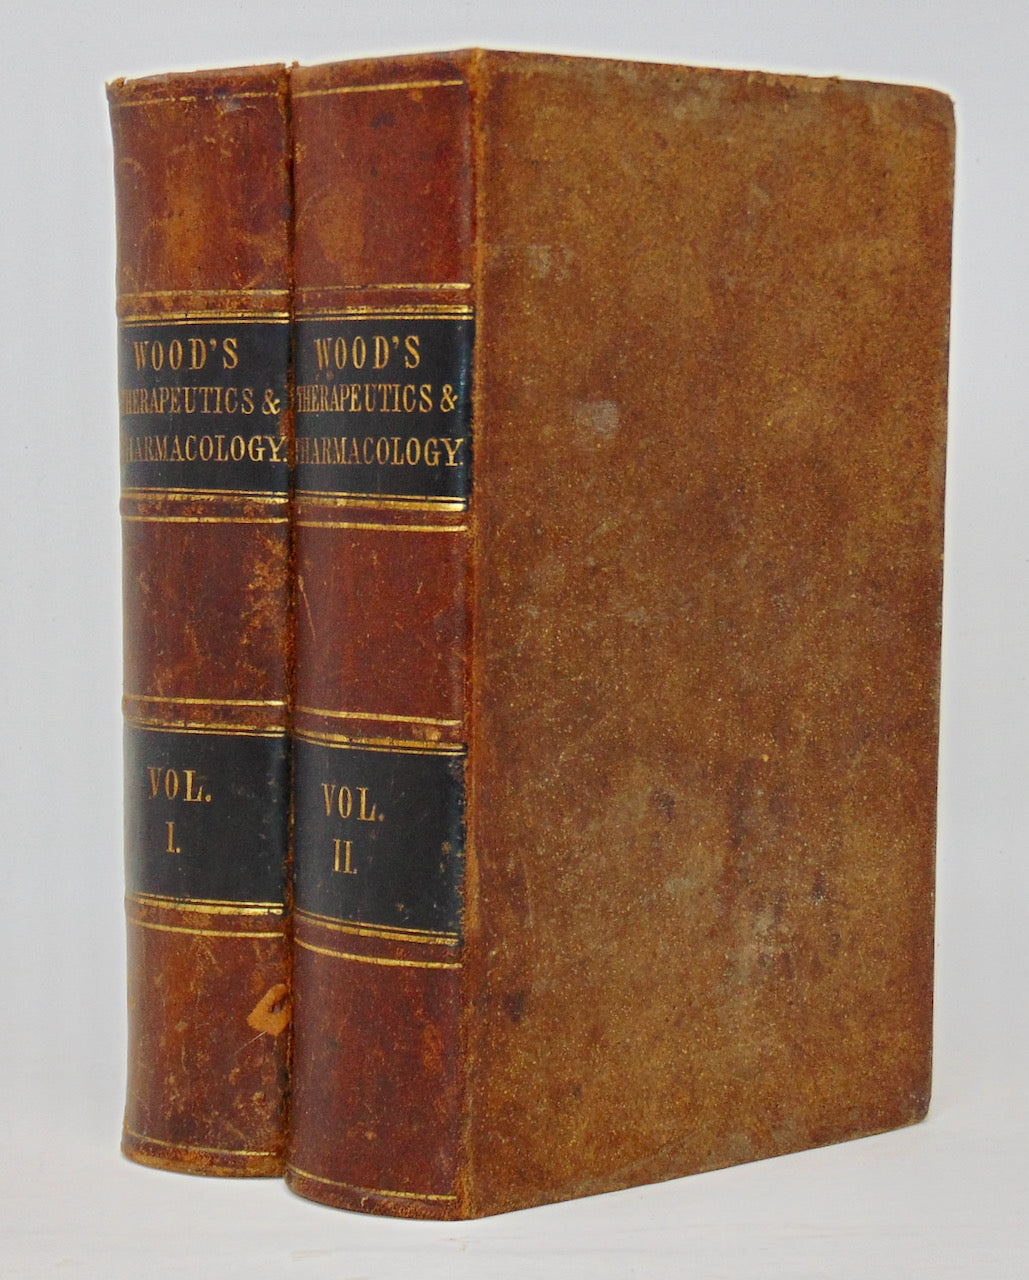 Wood, George B. A Treatise on Therapeutics, and Pharmacology or Materia Medica (2 volume set)